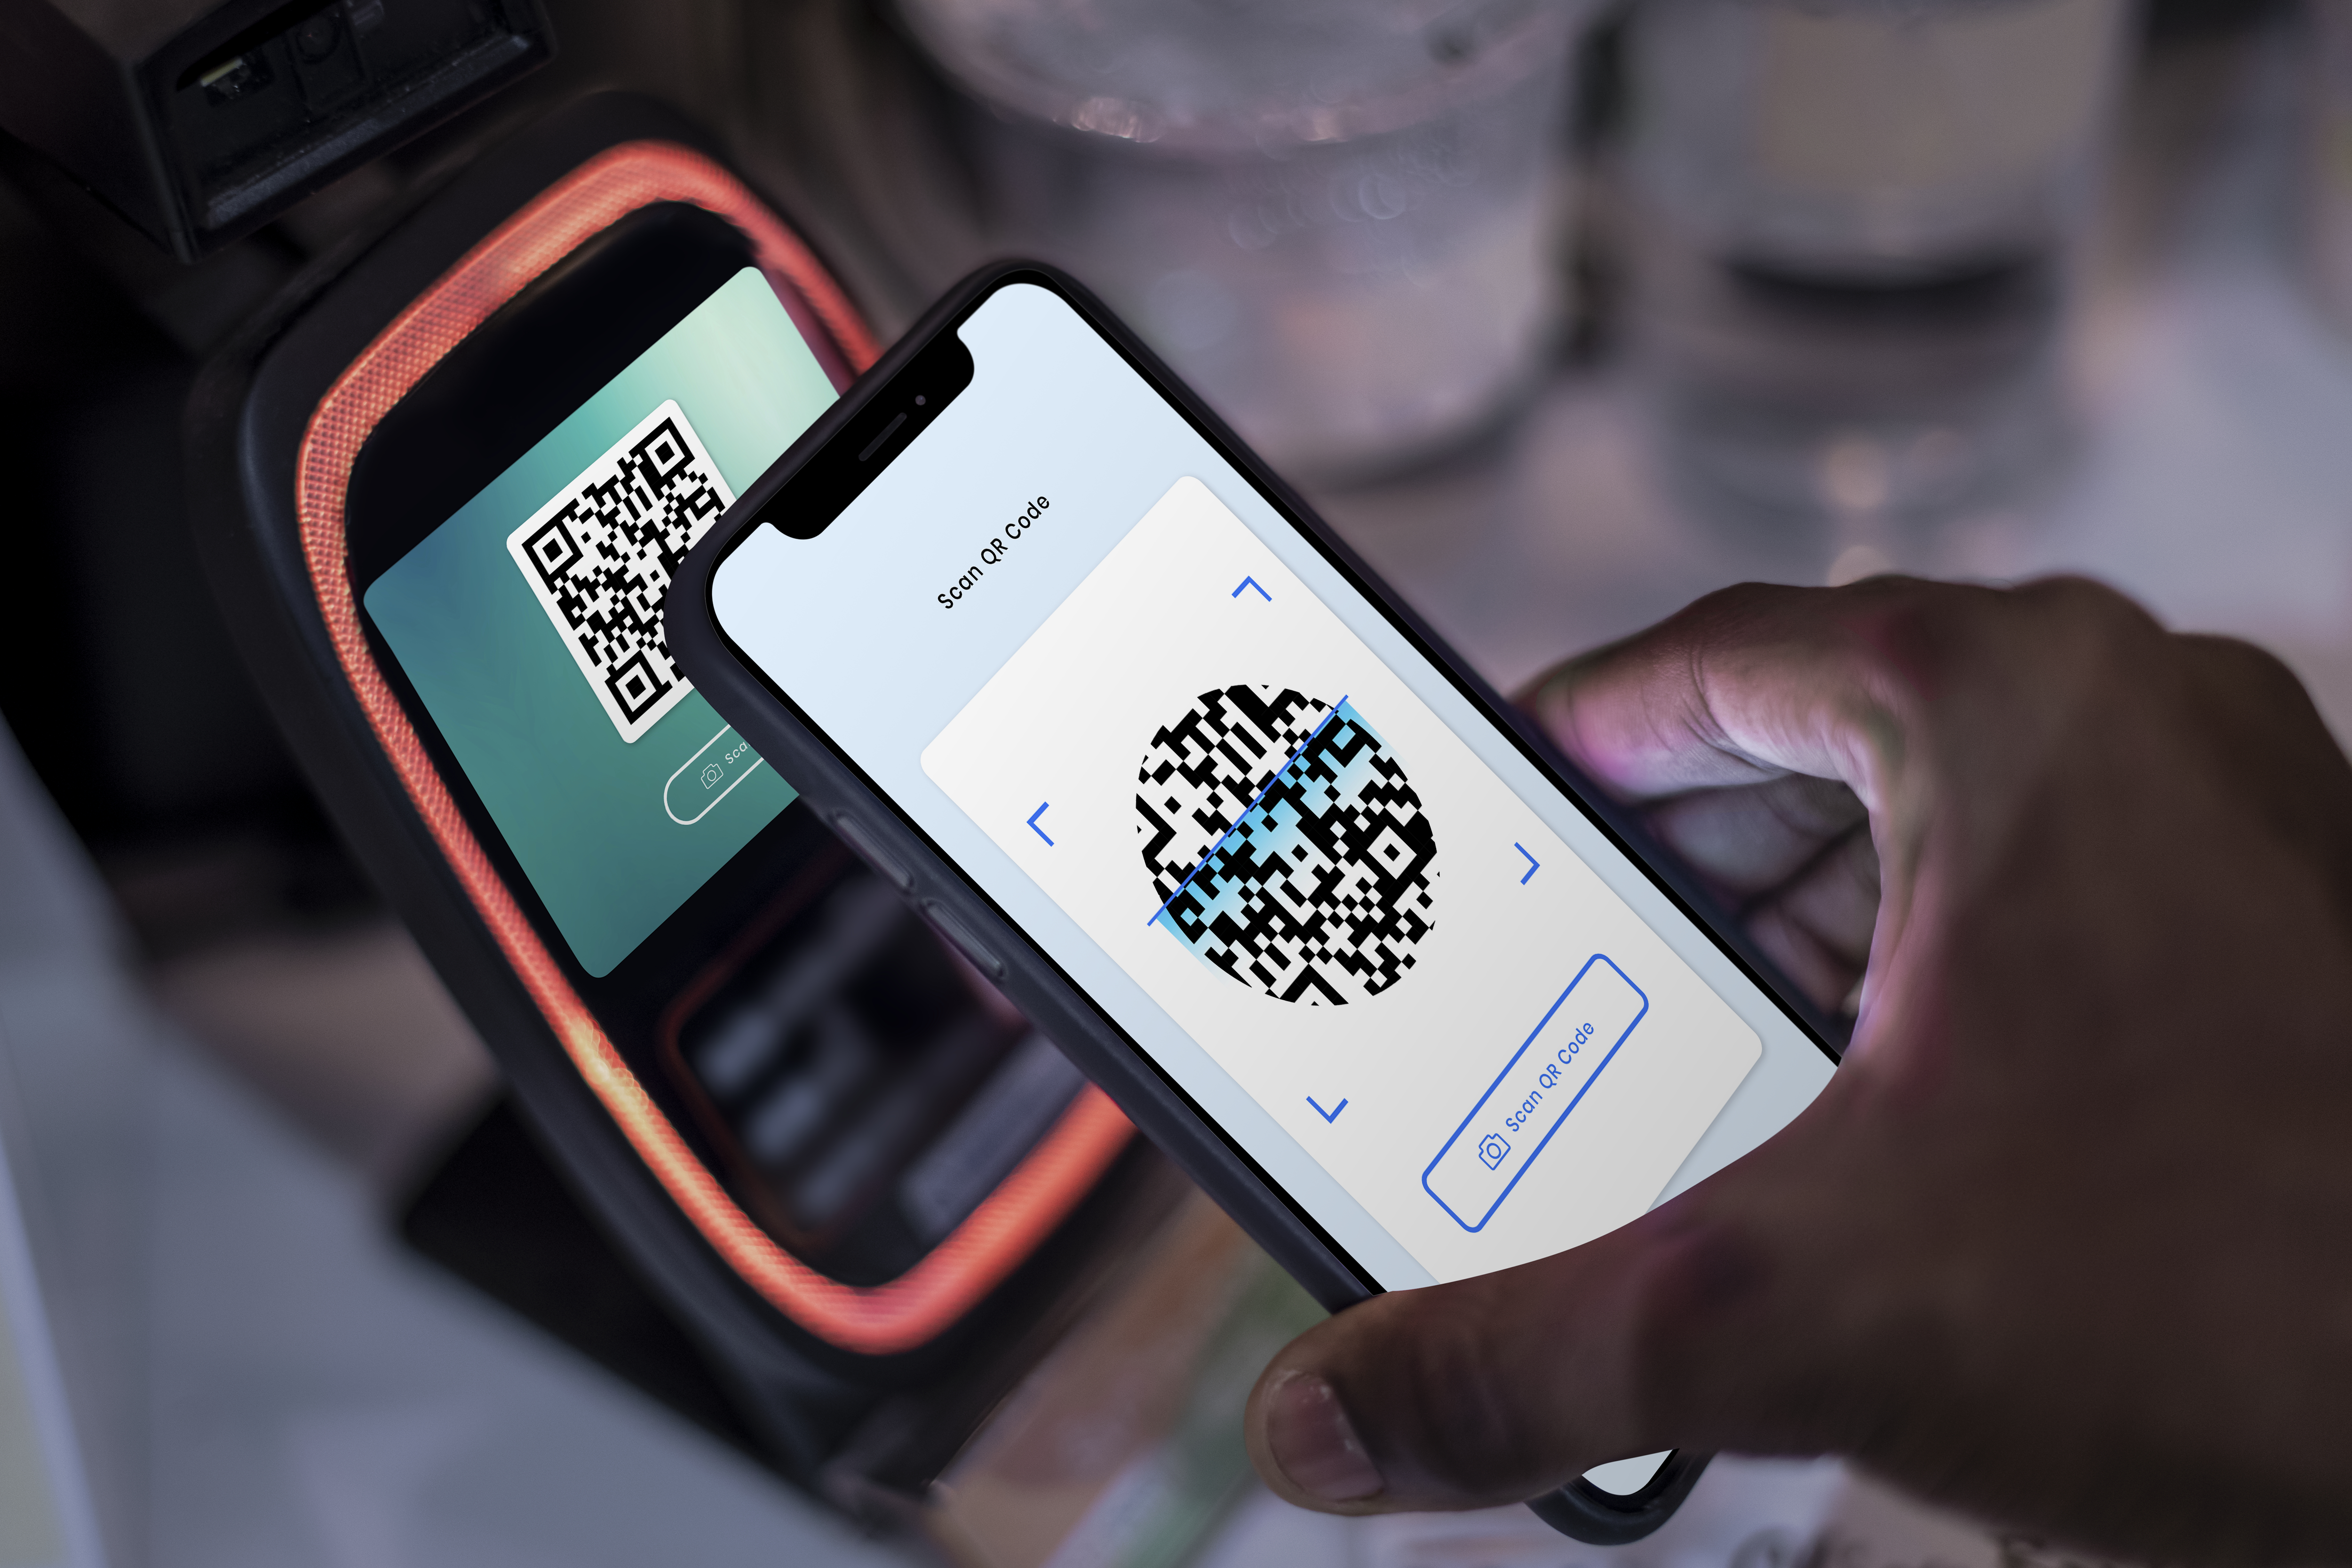 7-Eleven partners with Alipay to support the mobile wallet payment